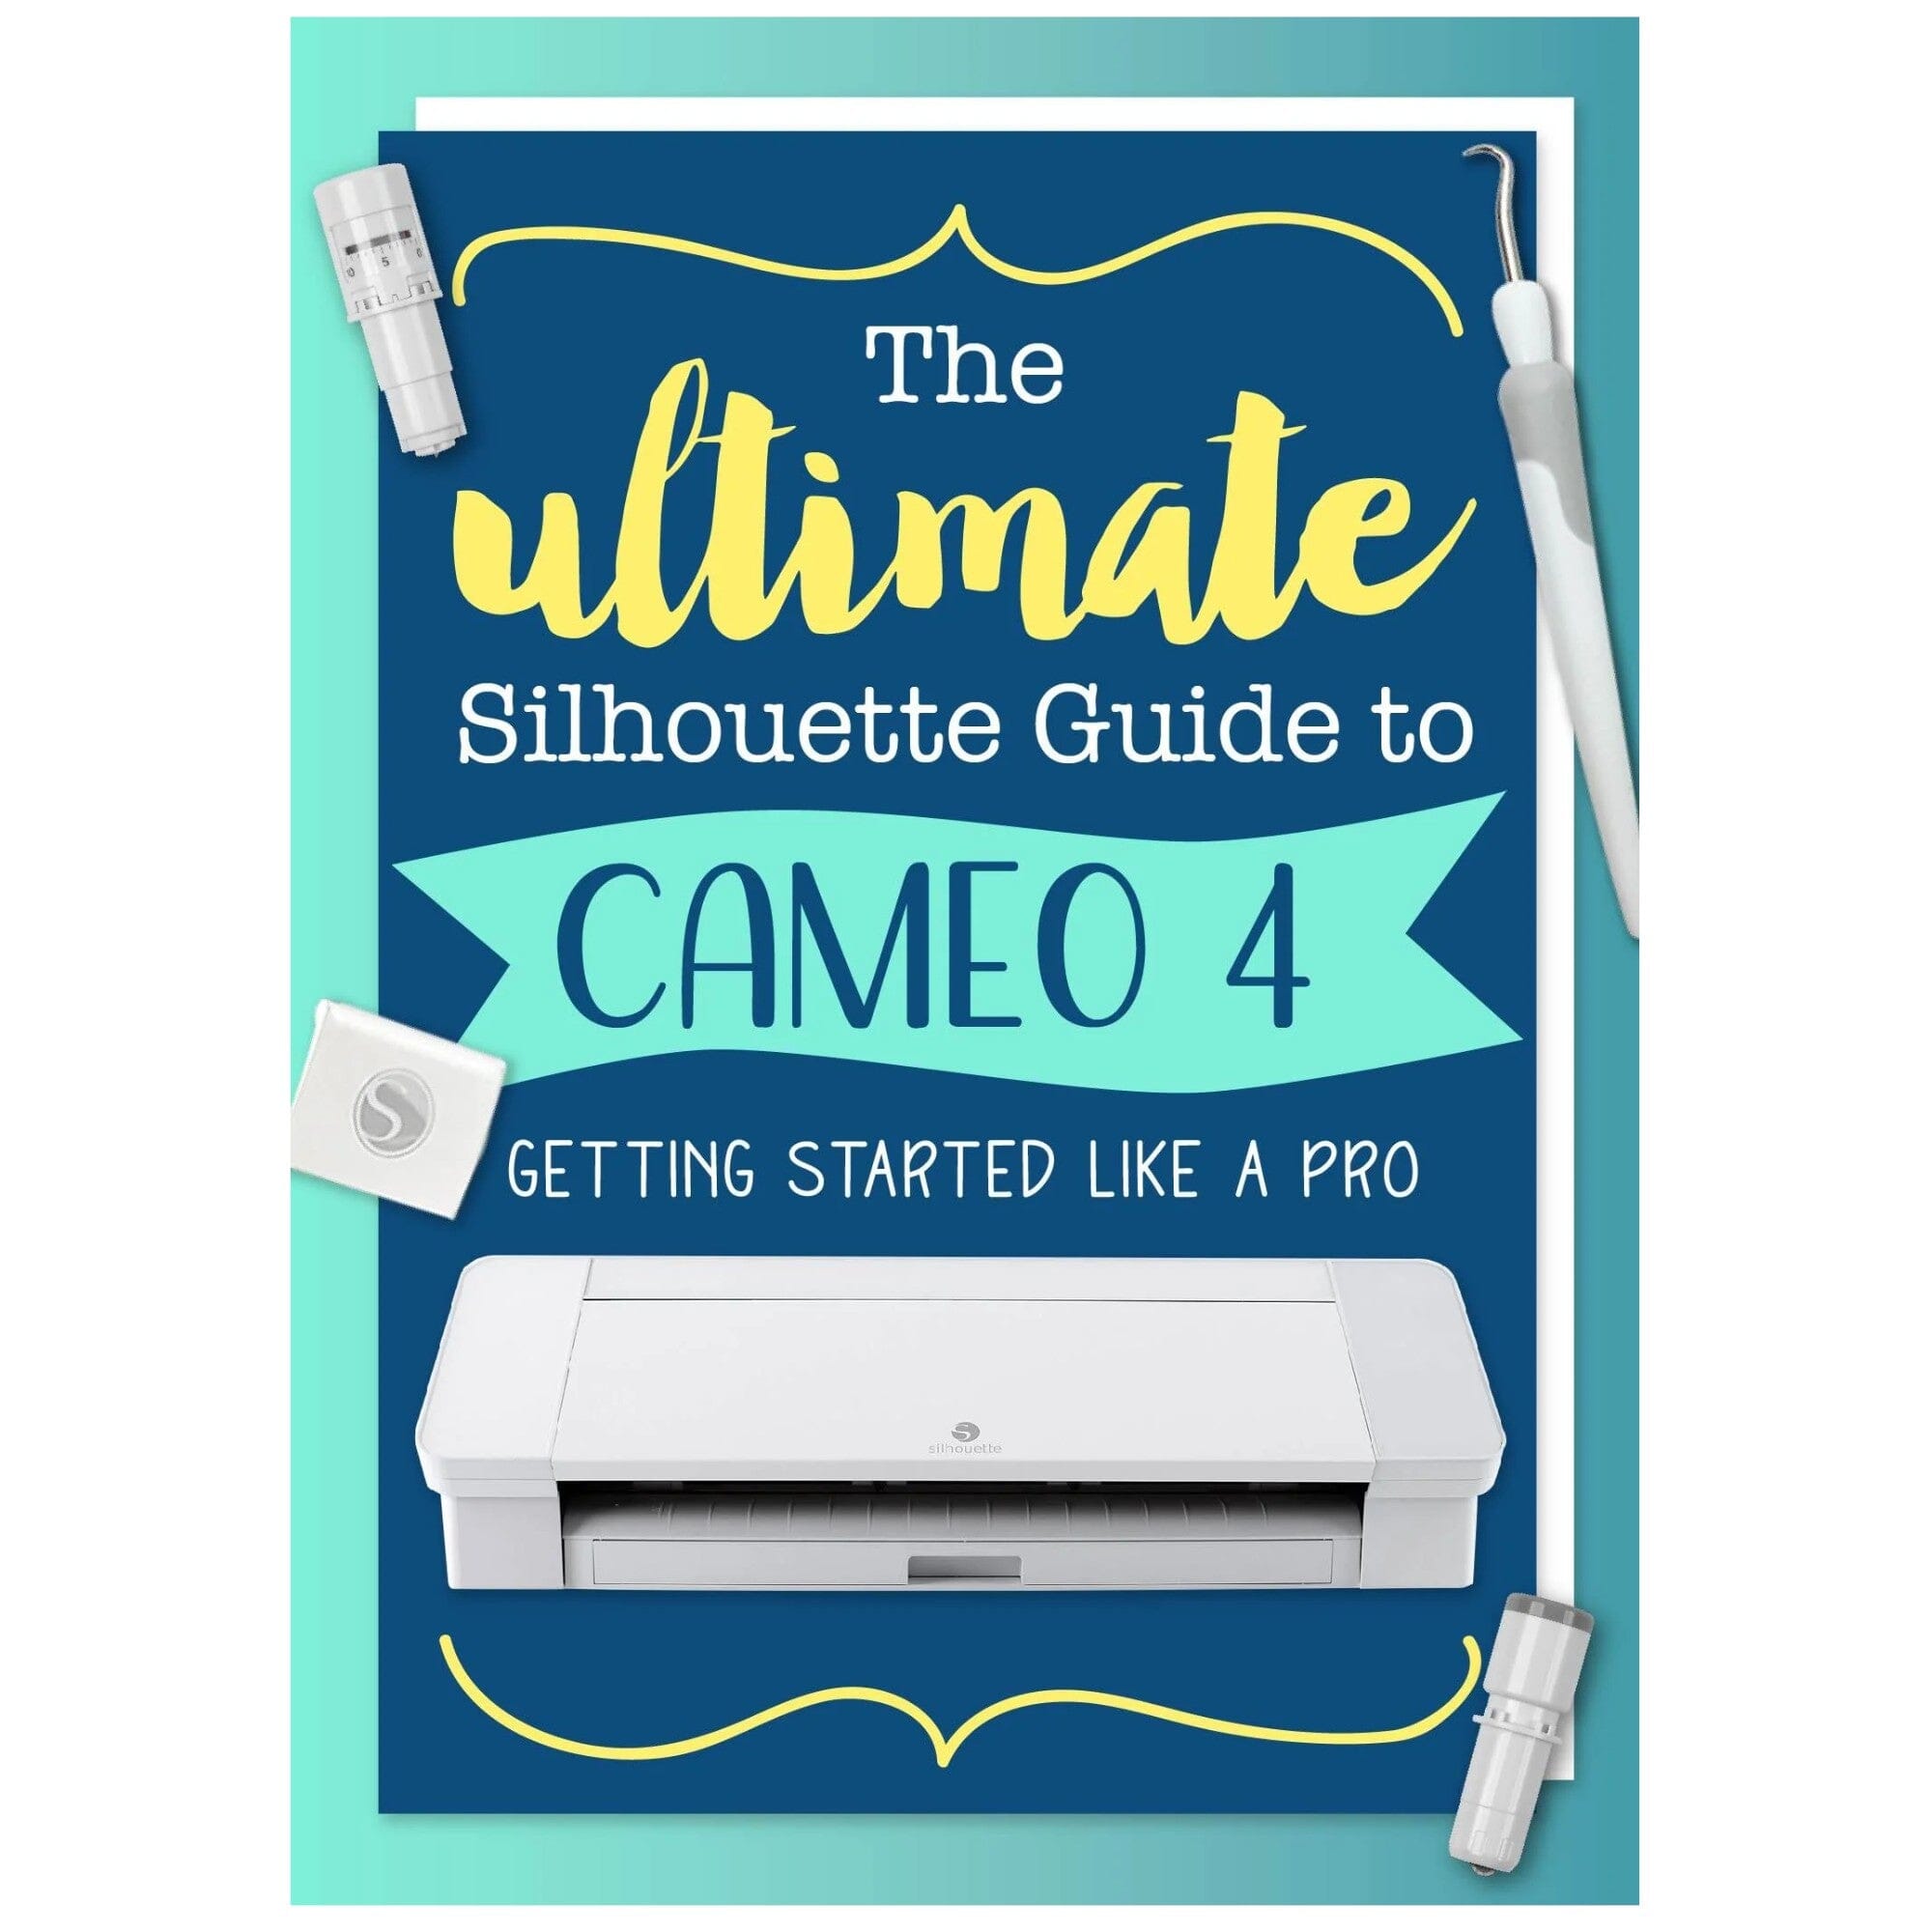 MDP Supplies: Silhouette Cameo Accessories